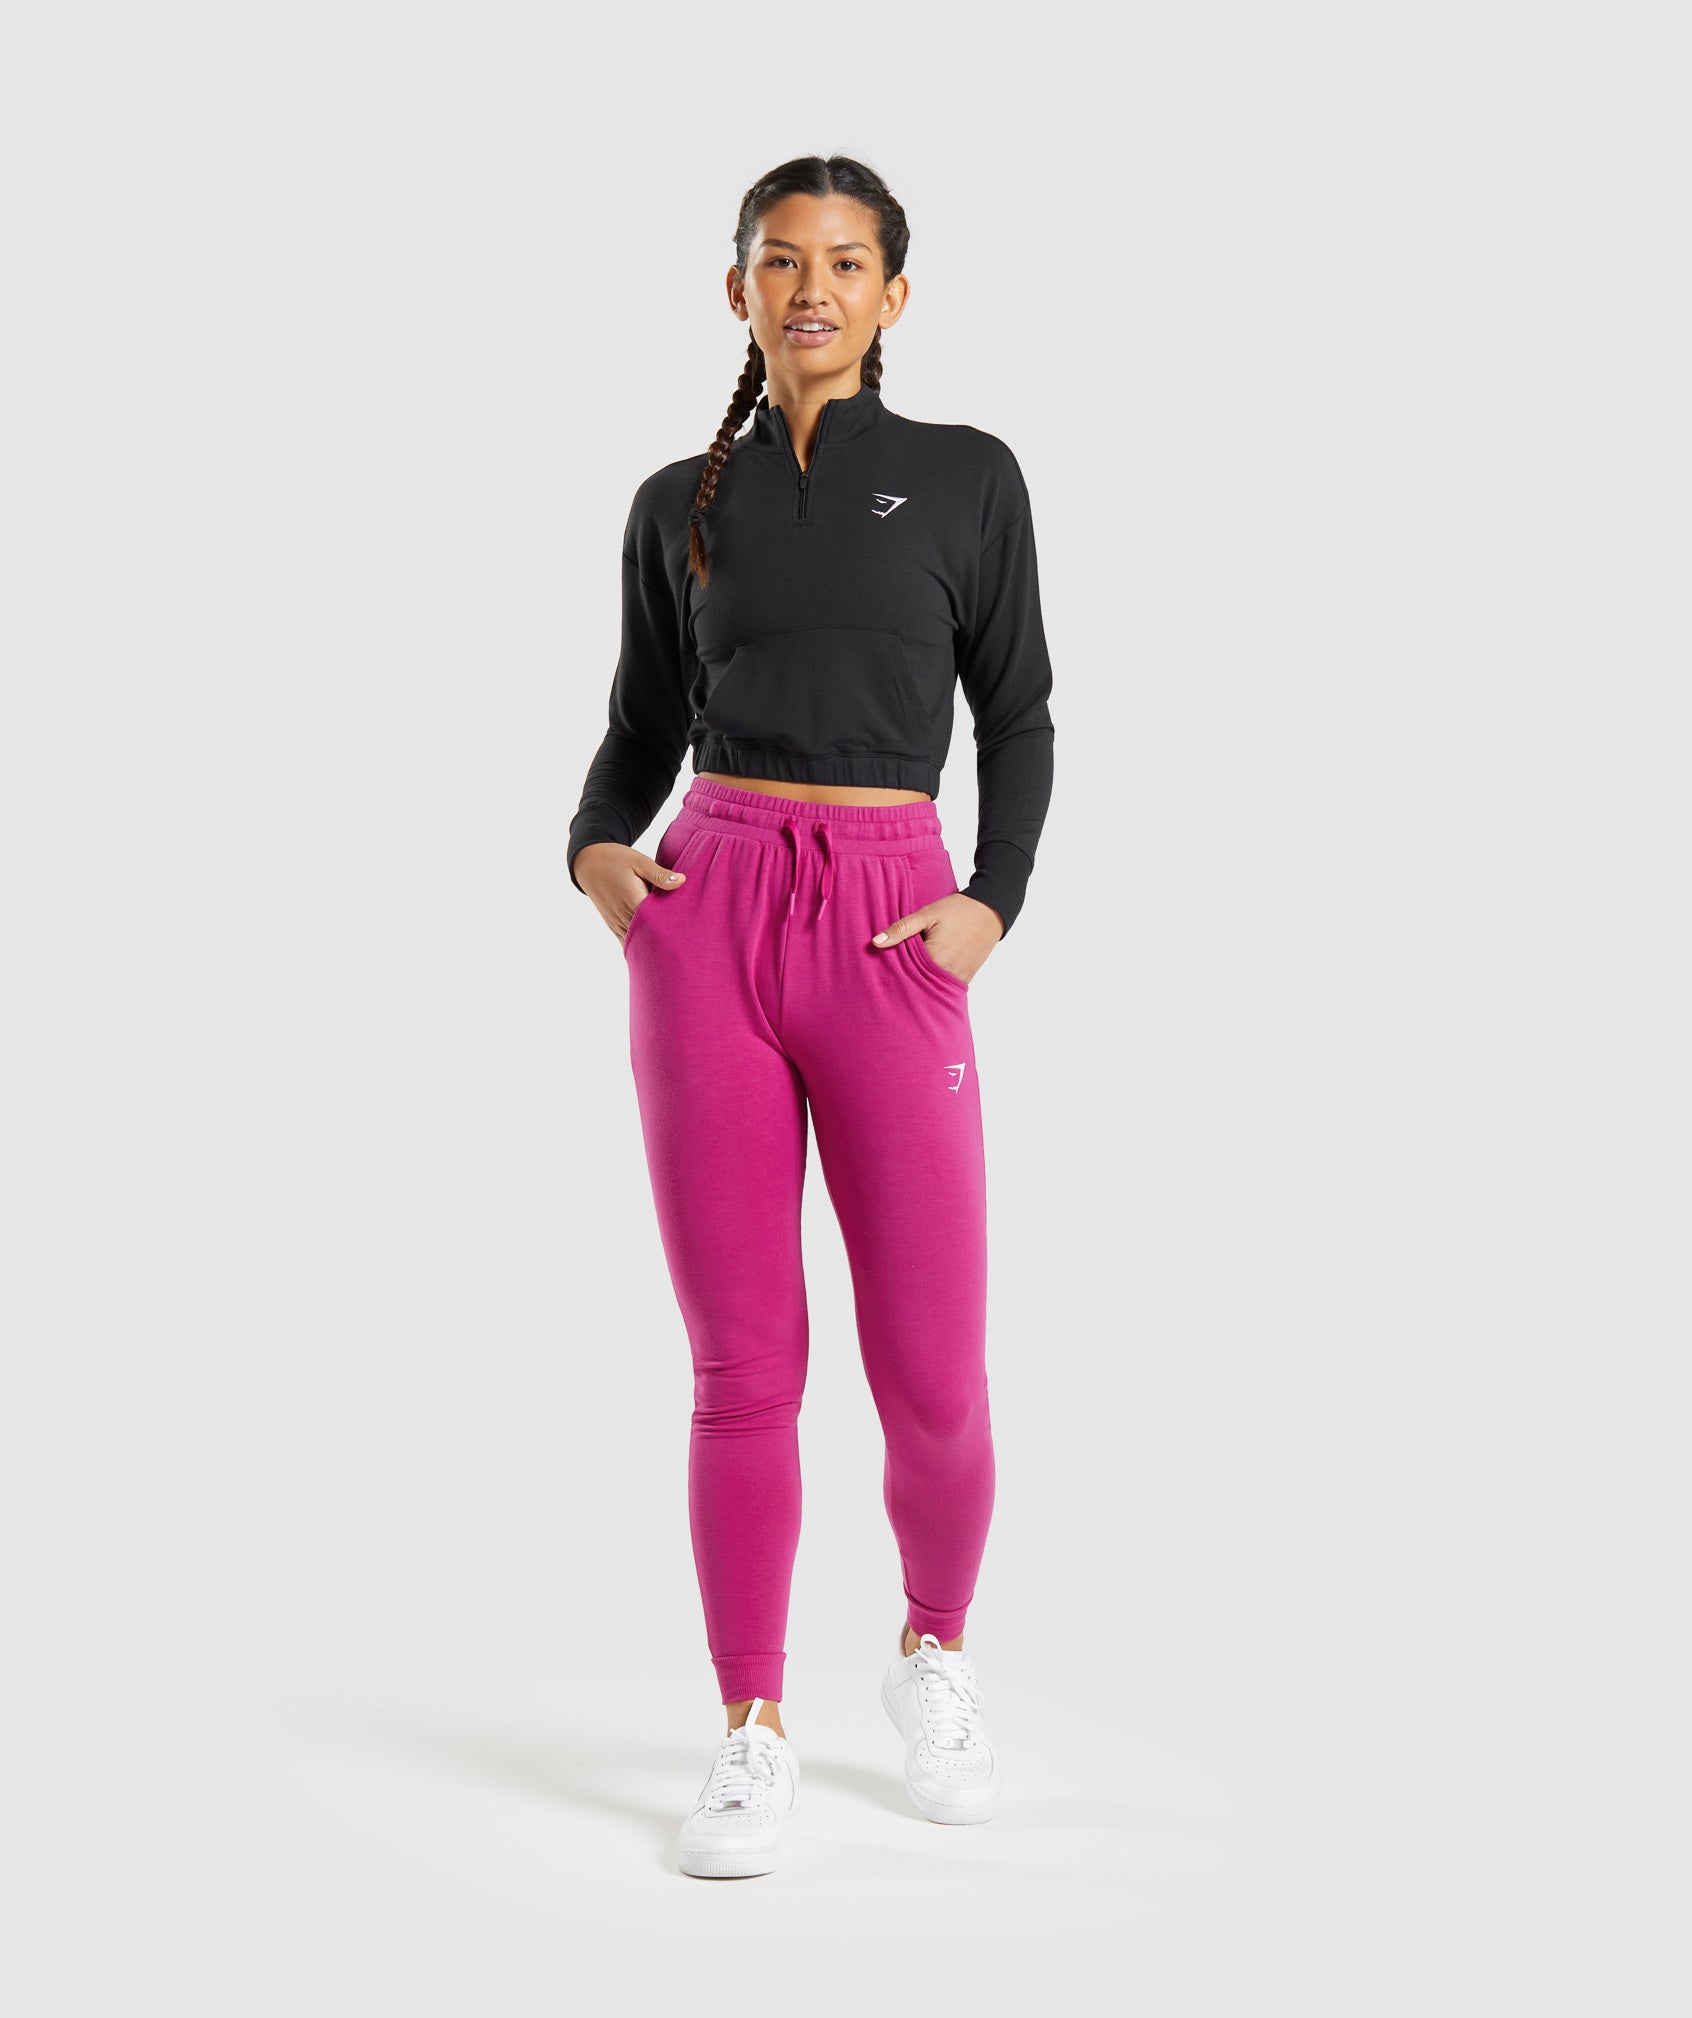 Training Pippa Pullover in Black - view 4